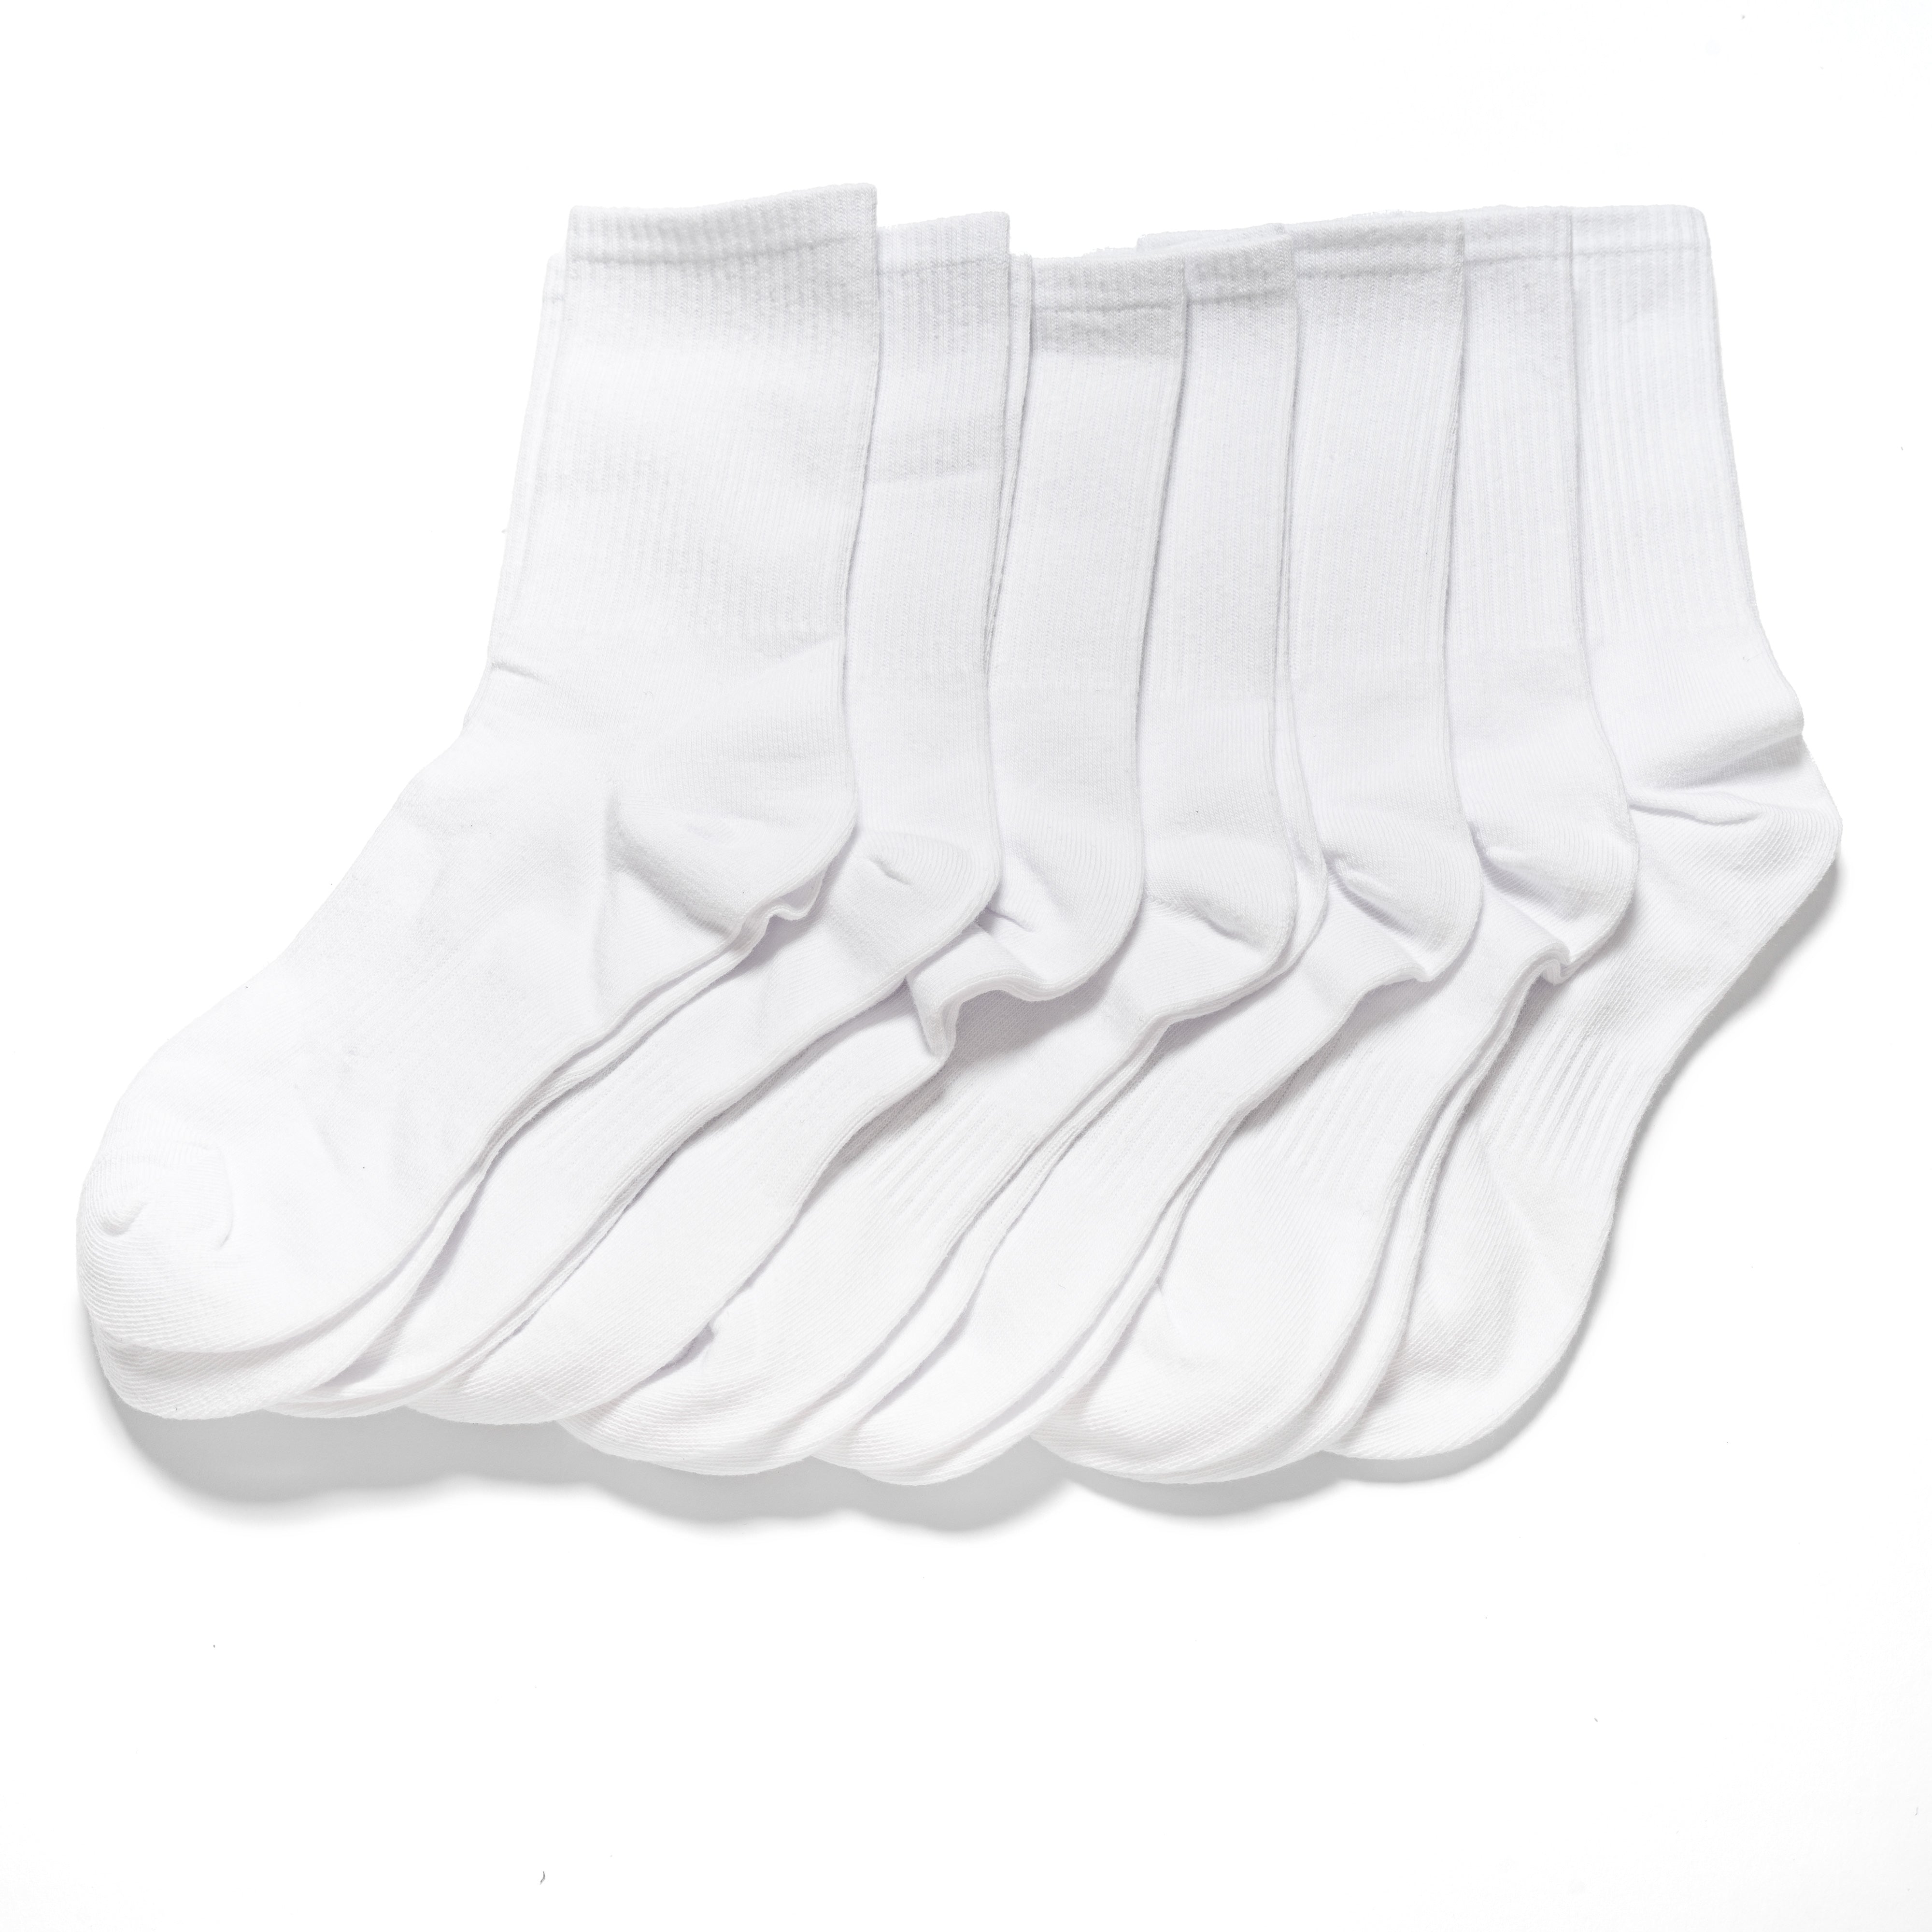 31 Pairs of High Cotton High Ankle Women's Socks - New Socks Daily